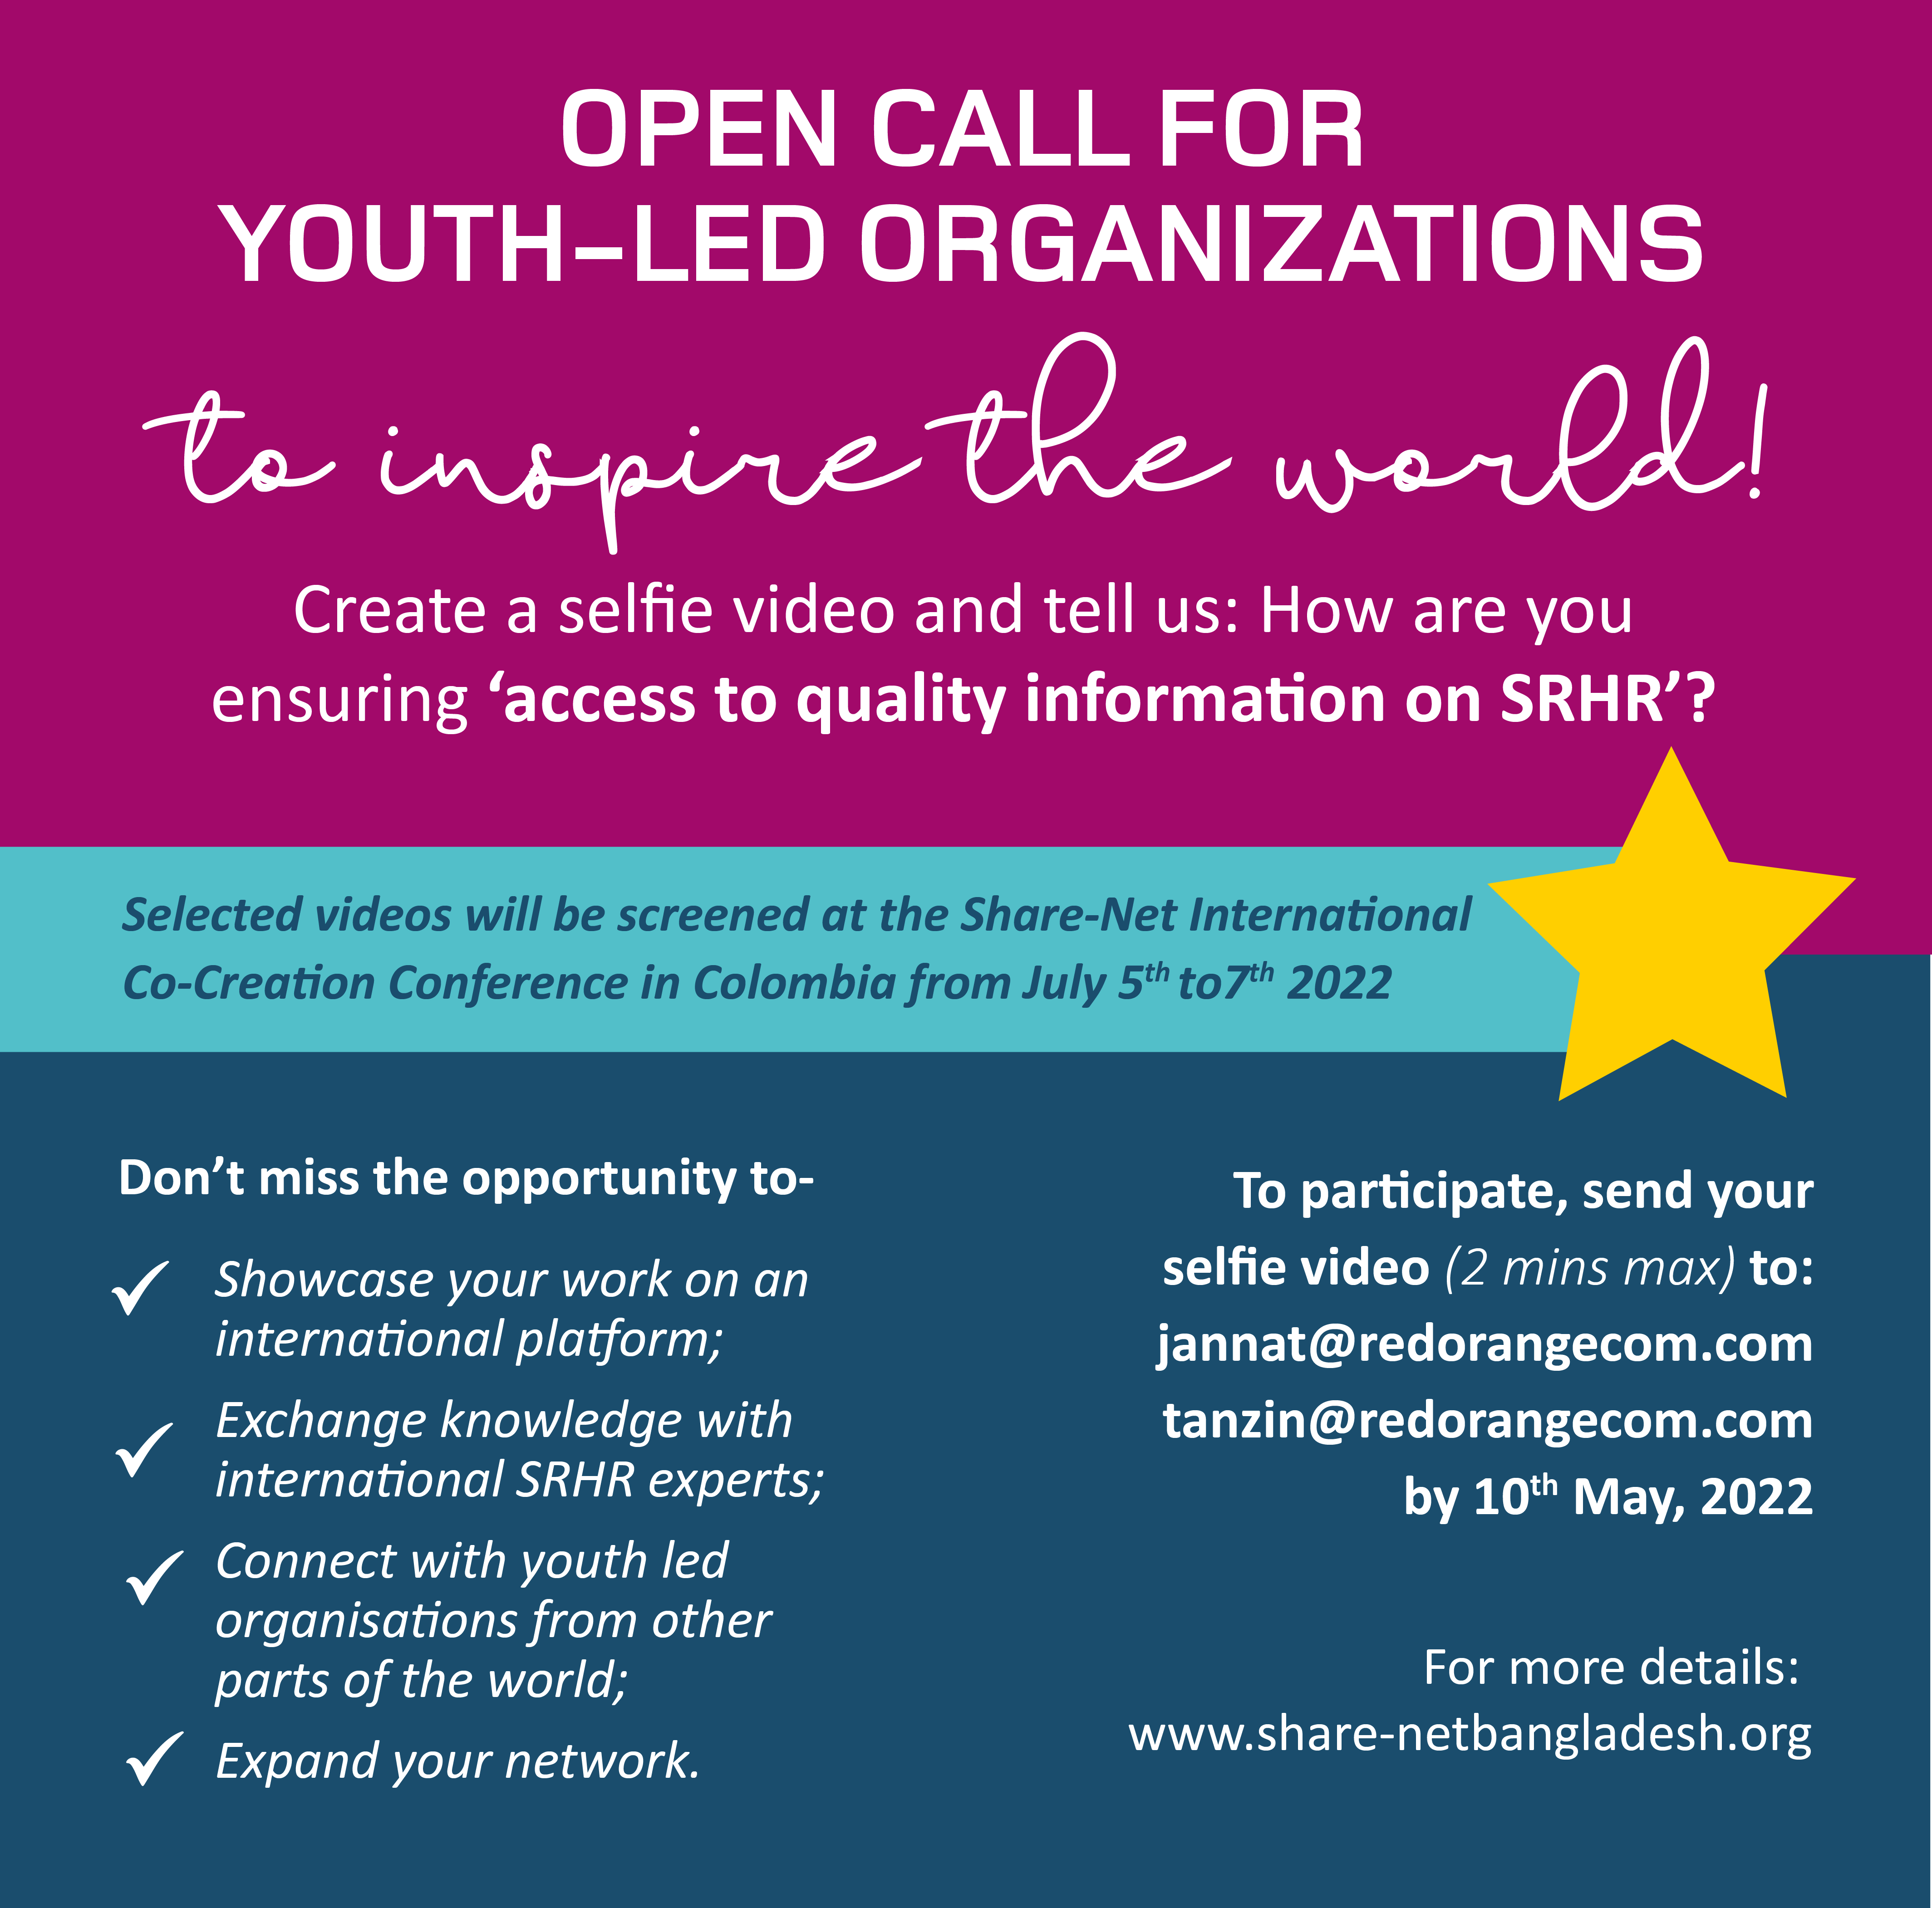 Open call for youth-led organizations to send a video to inspire the world!